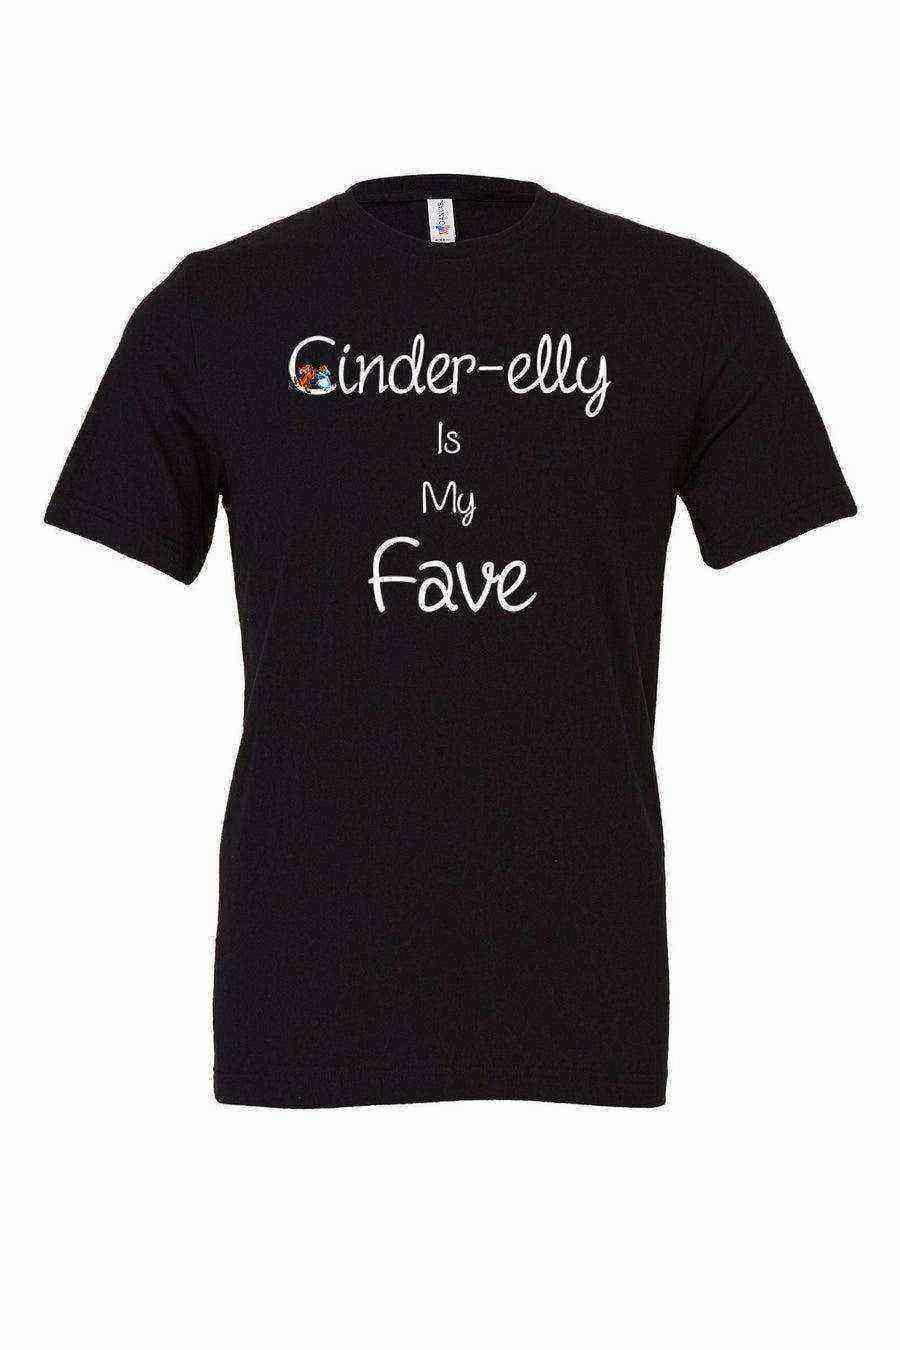 Cinder-elly is my Fave Shirt - Dylan's Tees